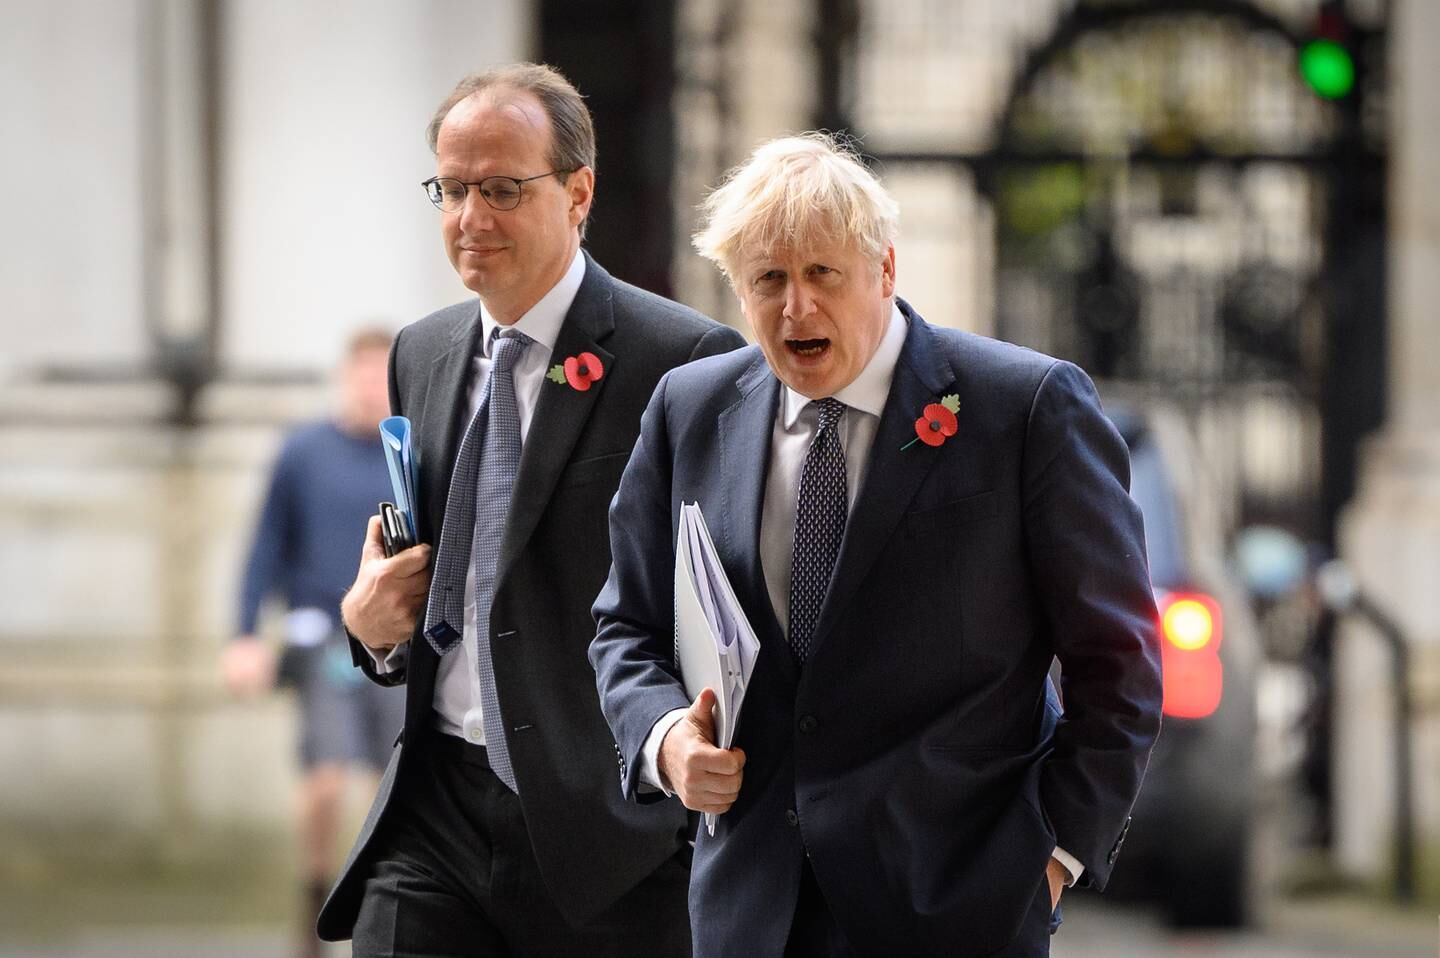 Britain's Prime Minister Boris Johnson is accompanied by Martin Reynolds in Downing Street, November 2020. Photo: Getty